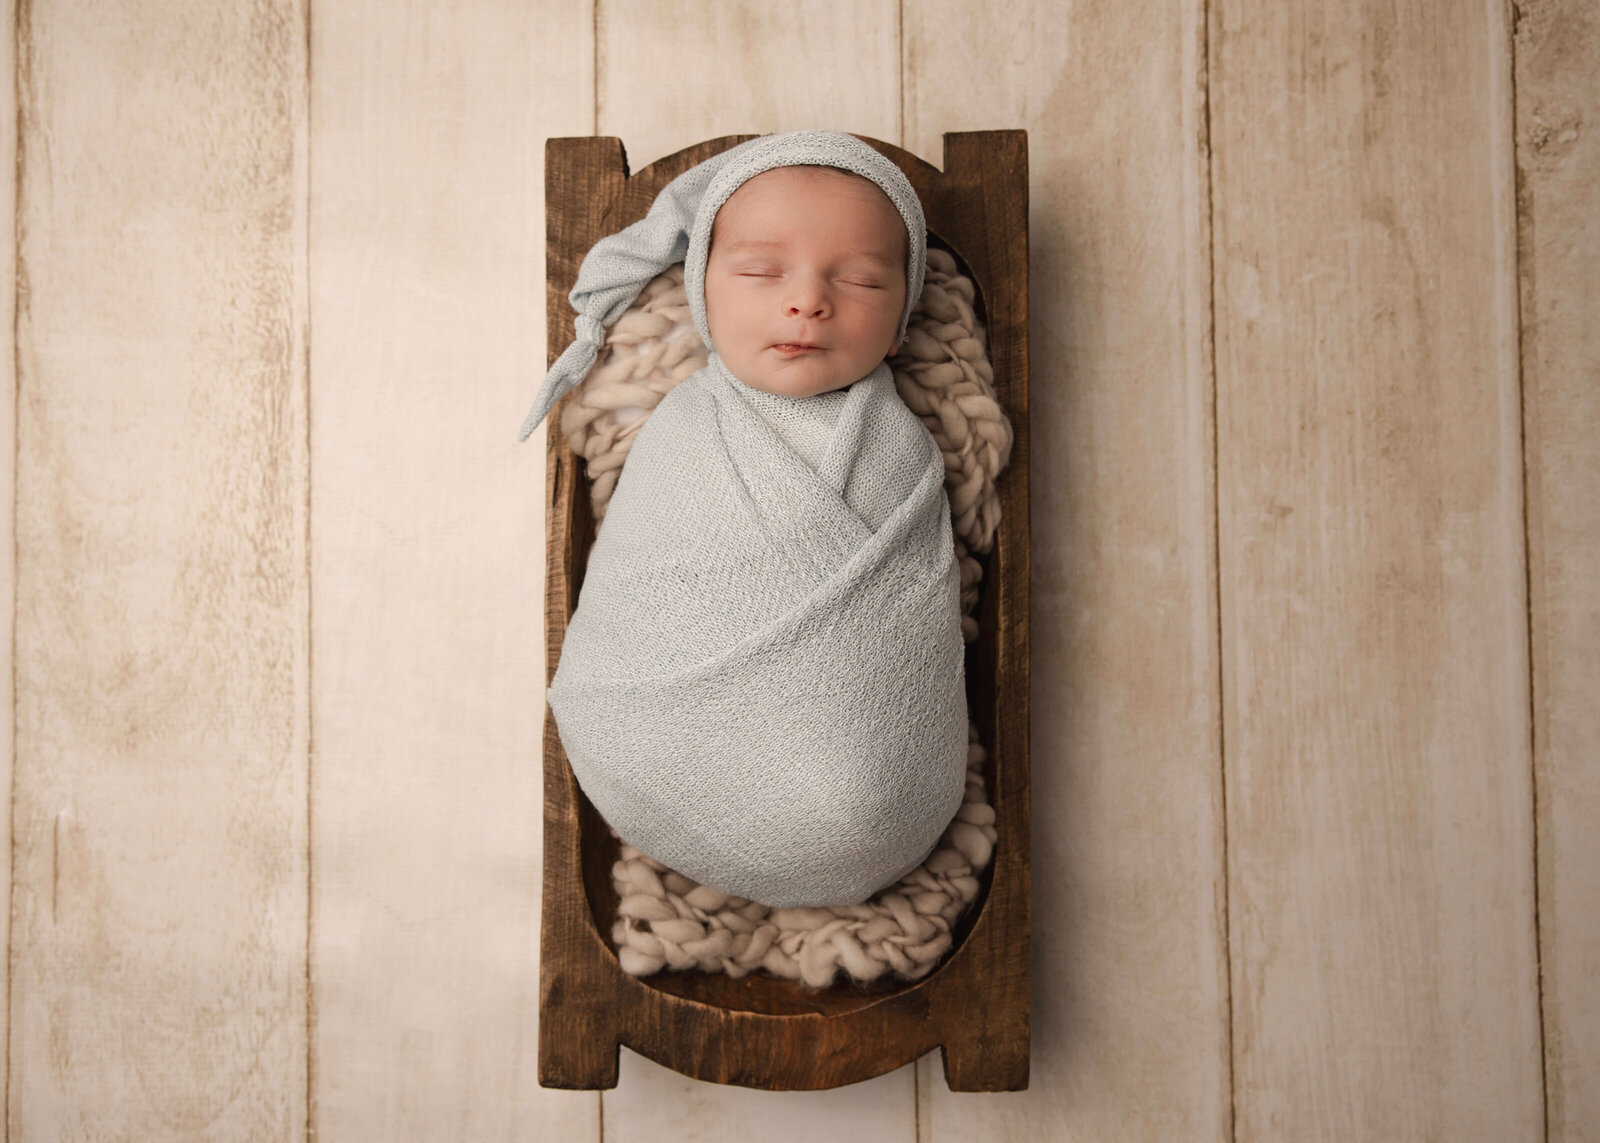 Baby boy sleeping in  wood trench bowl  in studio newborn session by Ashley Nicole Photography.